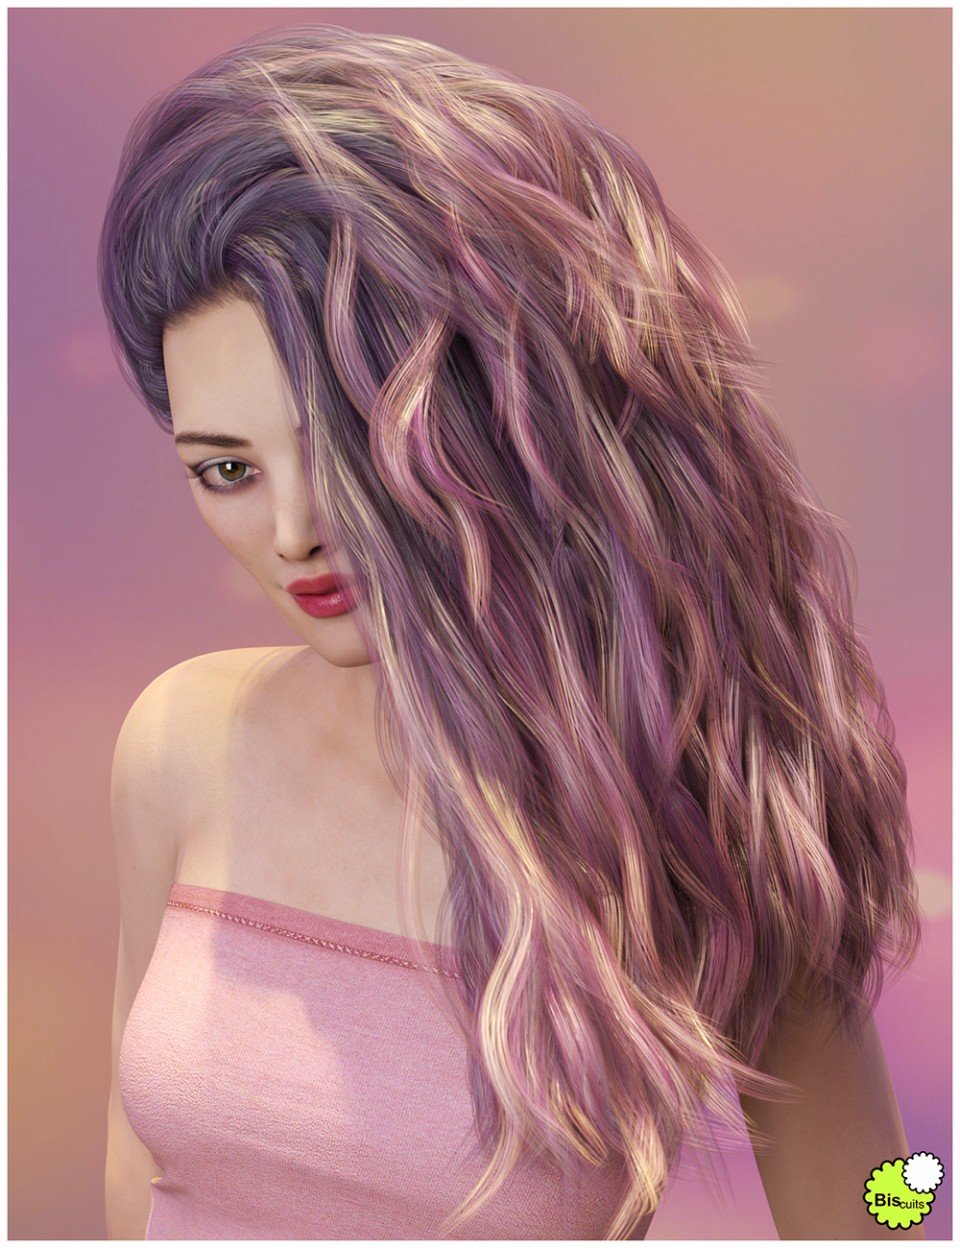 Texture Expansion for Biscuits Jam Hair_DAZ3D下载站